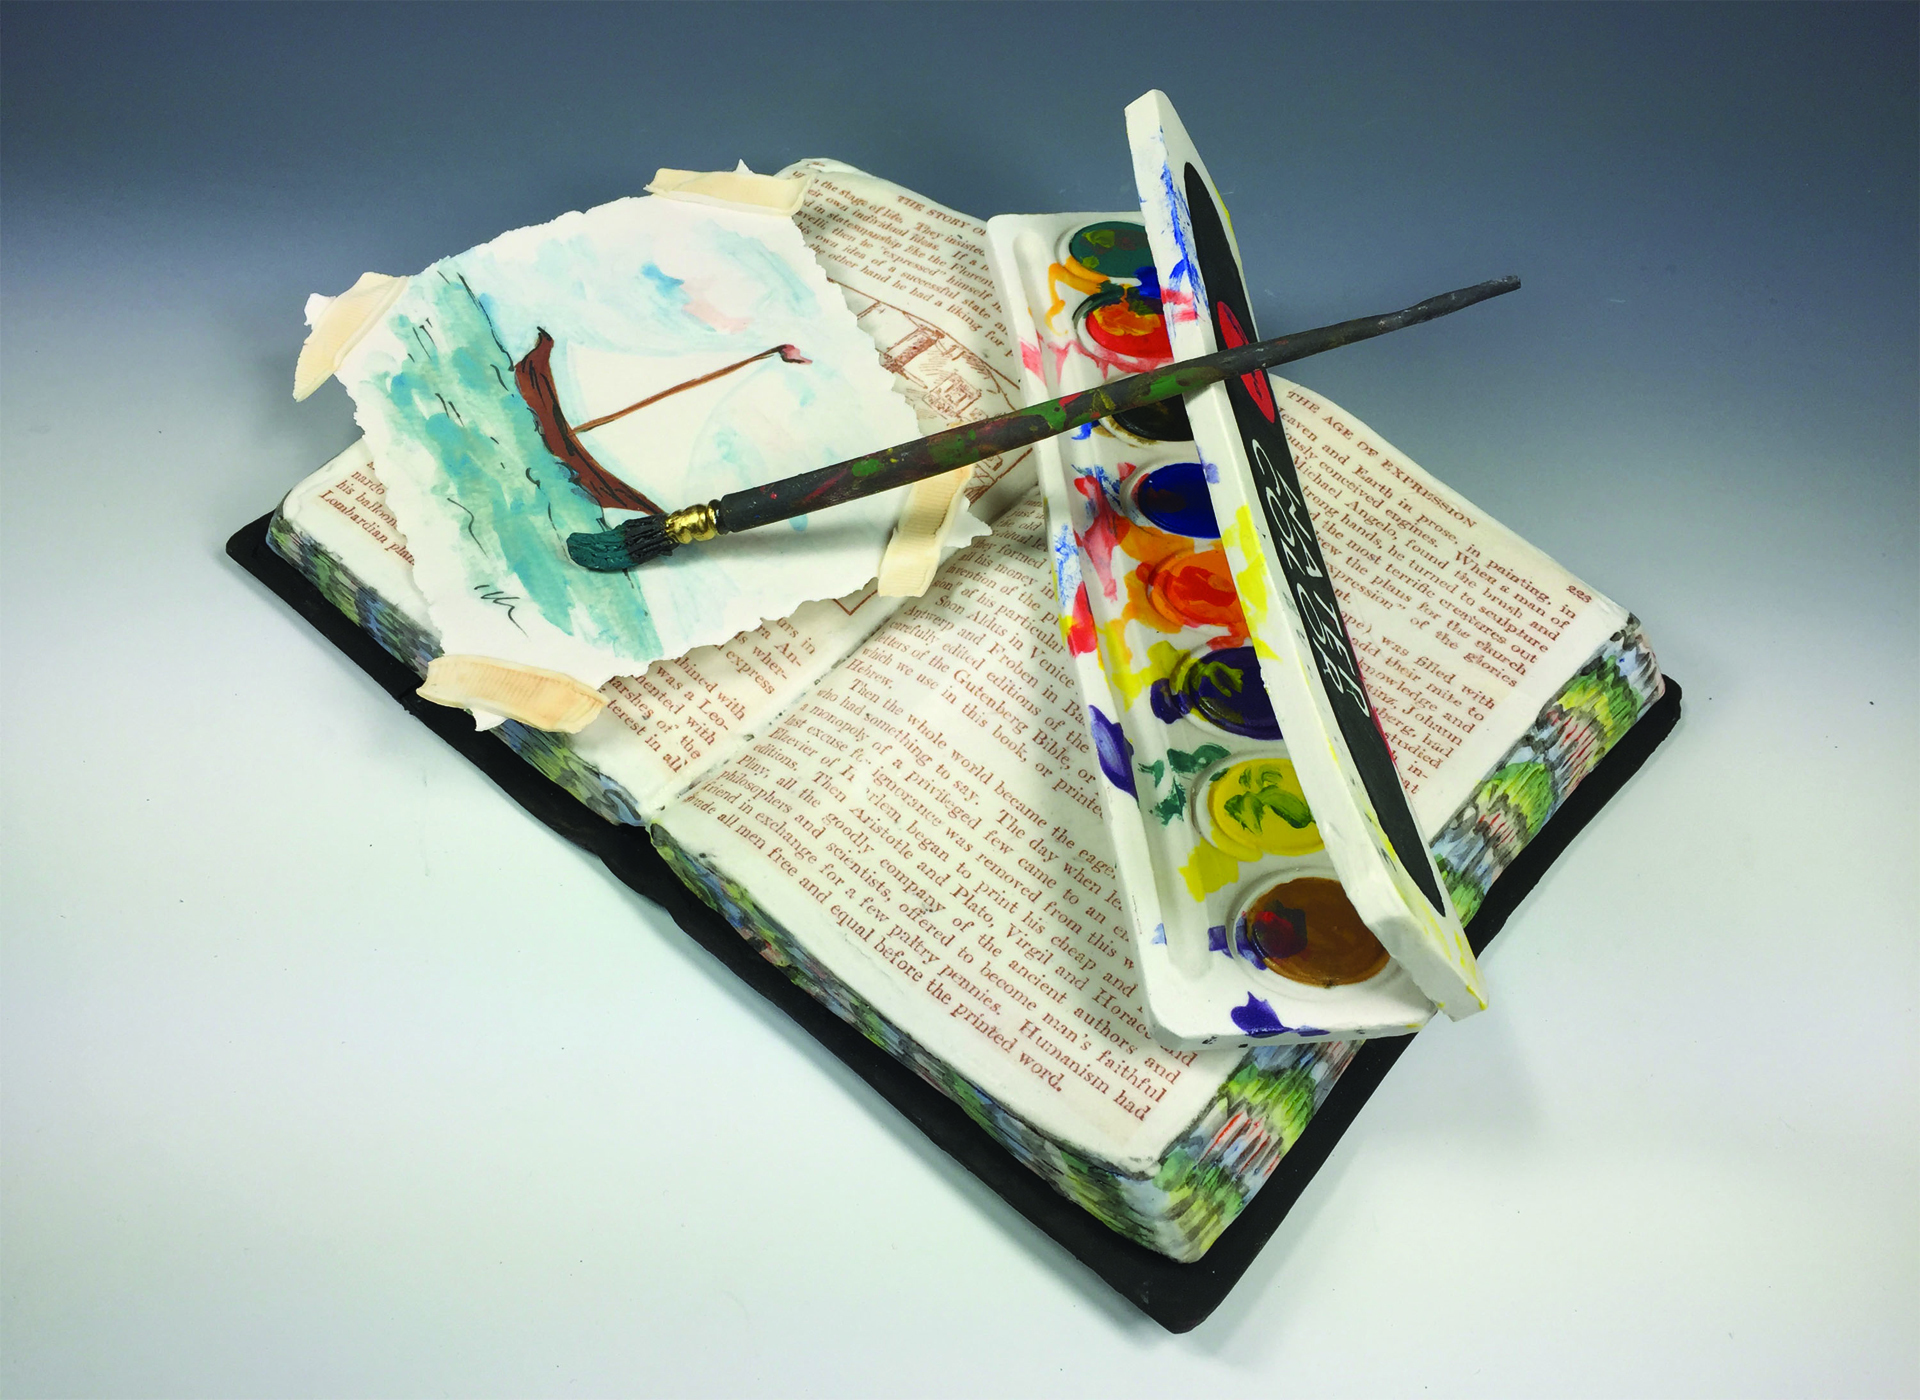 Suzanne Sidebottom used porcelain clay, underglazes and ceramic decals to create a realistic image of an open book, a palette and a paint brush on top of a small painting with tape on the corners.